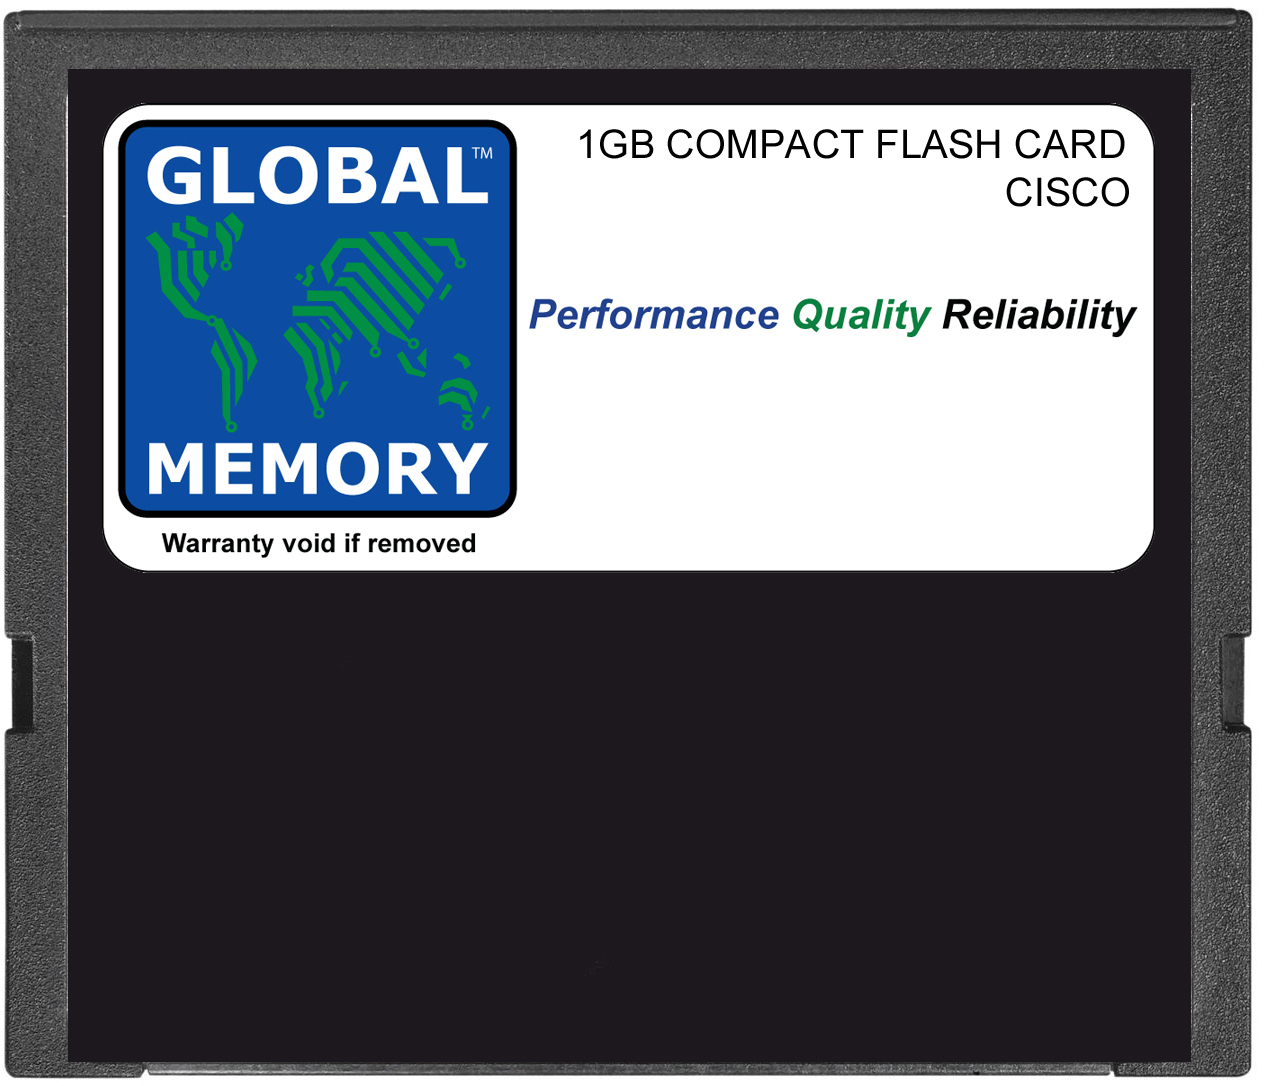 1GB COMPACT FLASH CARD MEMORY FOR CISCO 10000 SERIES ROUTERS PRE-3 PERFORMANCE ROUTING ENGINE (MEM-10K-CPTFL1G) - Click Image to Close